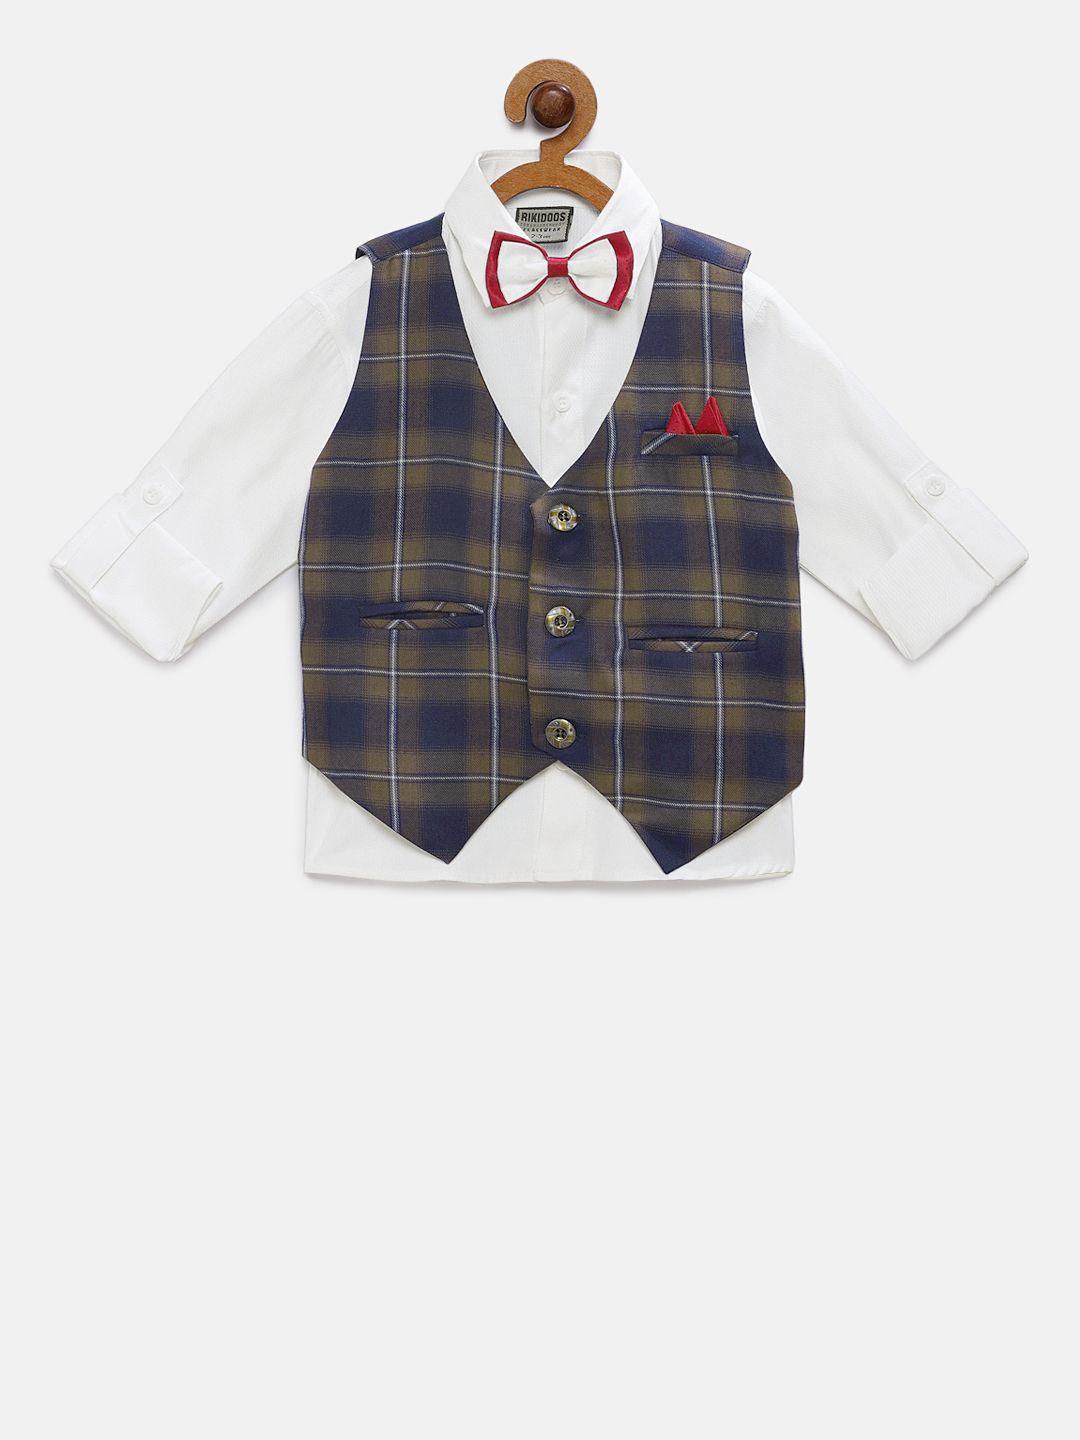 RIKIDOOS Boys White & Navy Blue Regular Fit Solid Casual Shirt with Waistcoat & Tie